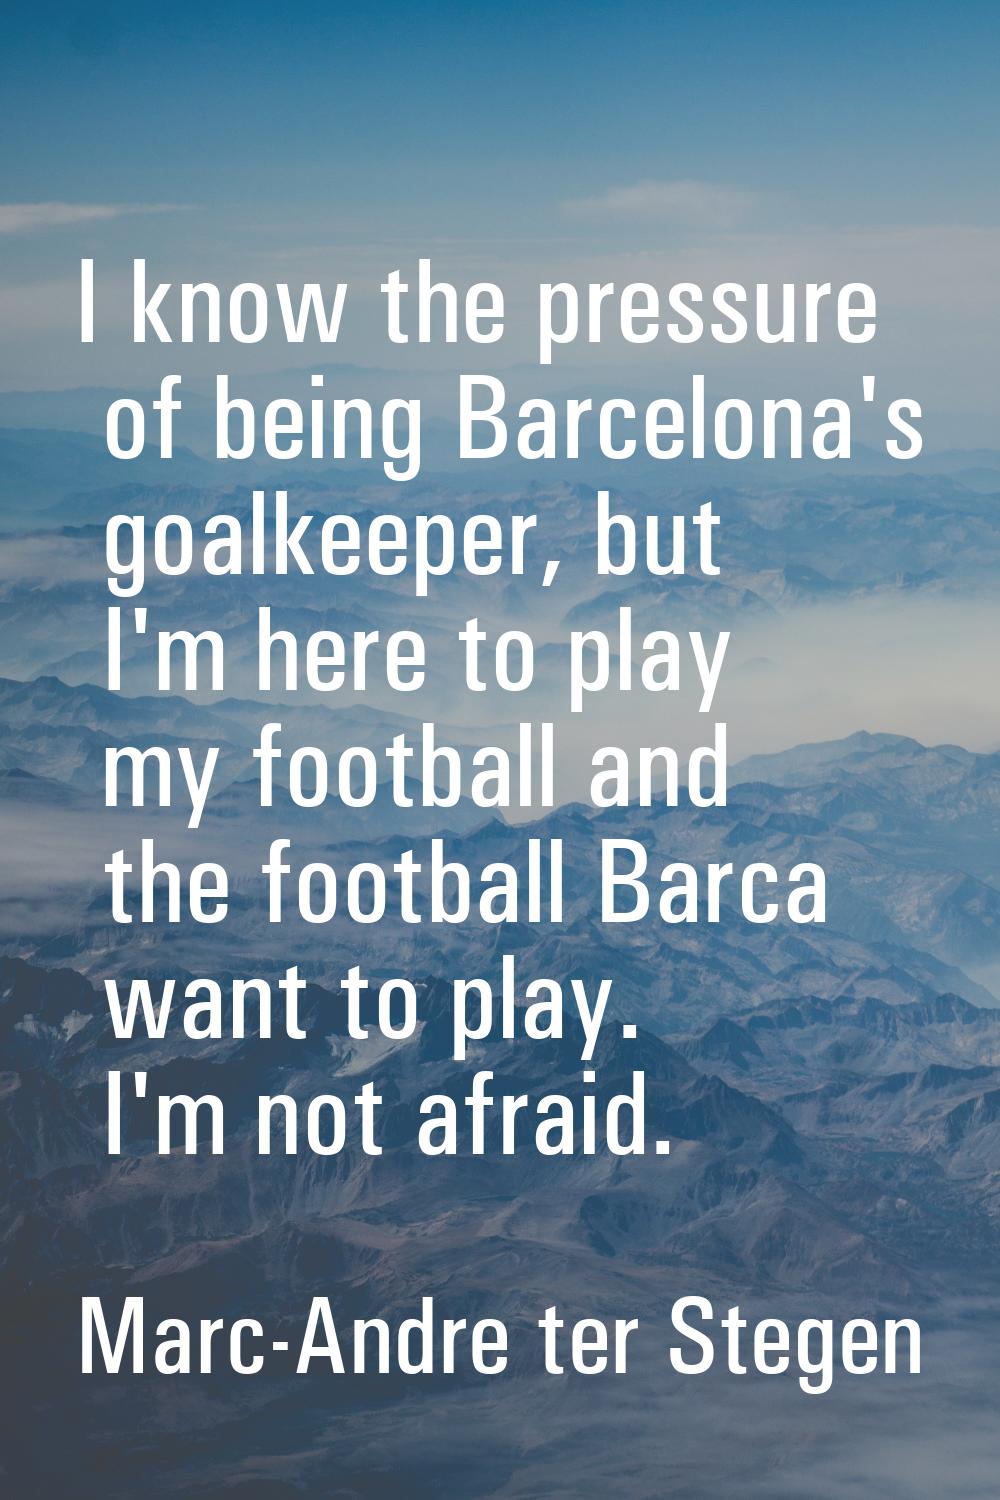 I know the pressure of being Barcelona's goalkeeper, but I'm here to play my football and the footb